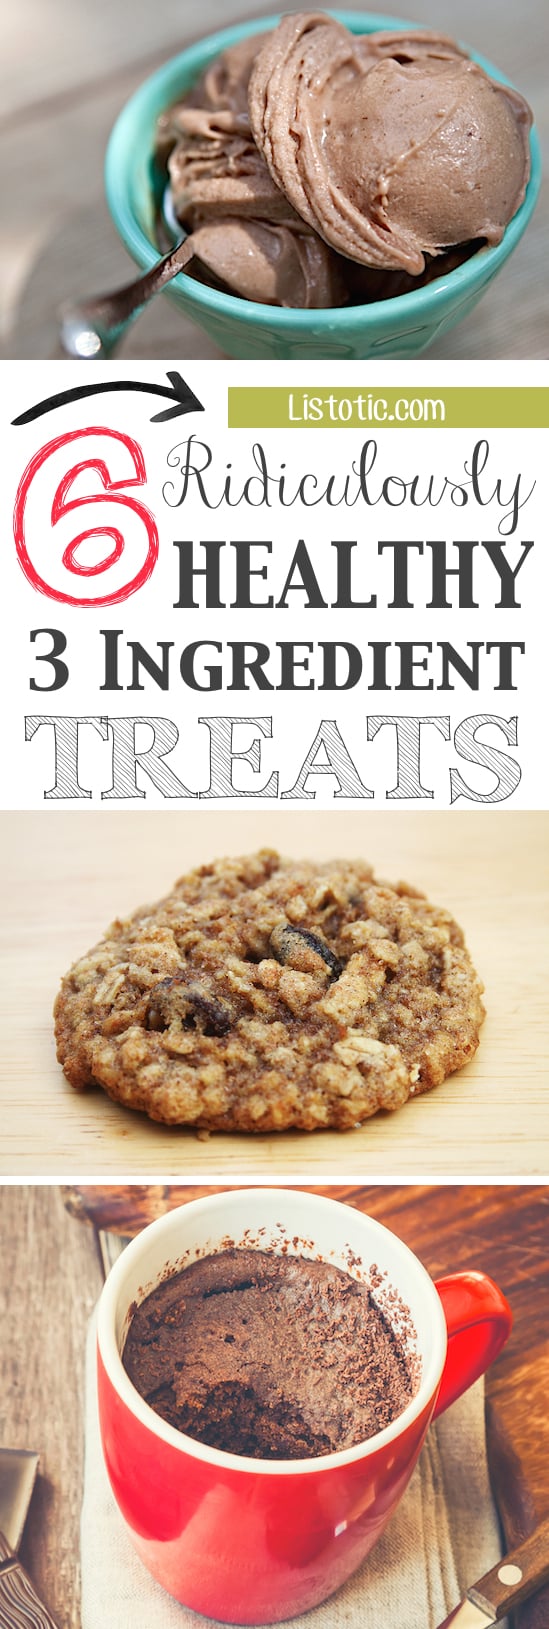 6 Ridiculously Healthy But Delicious 3-Ingredient Treats ...